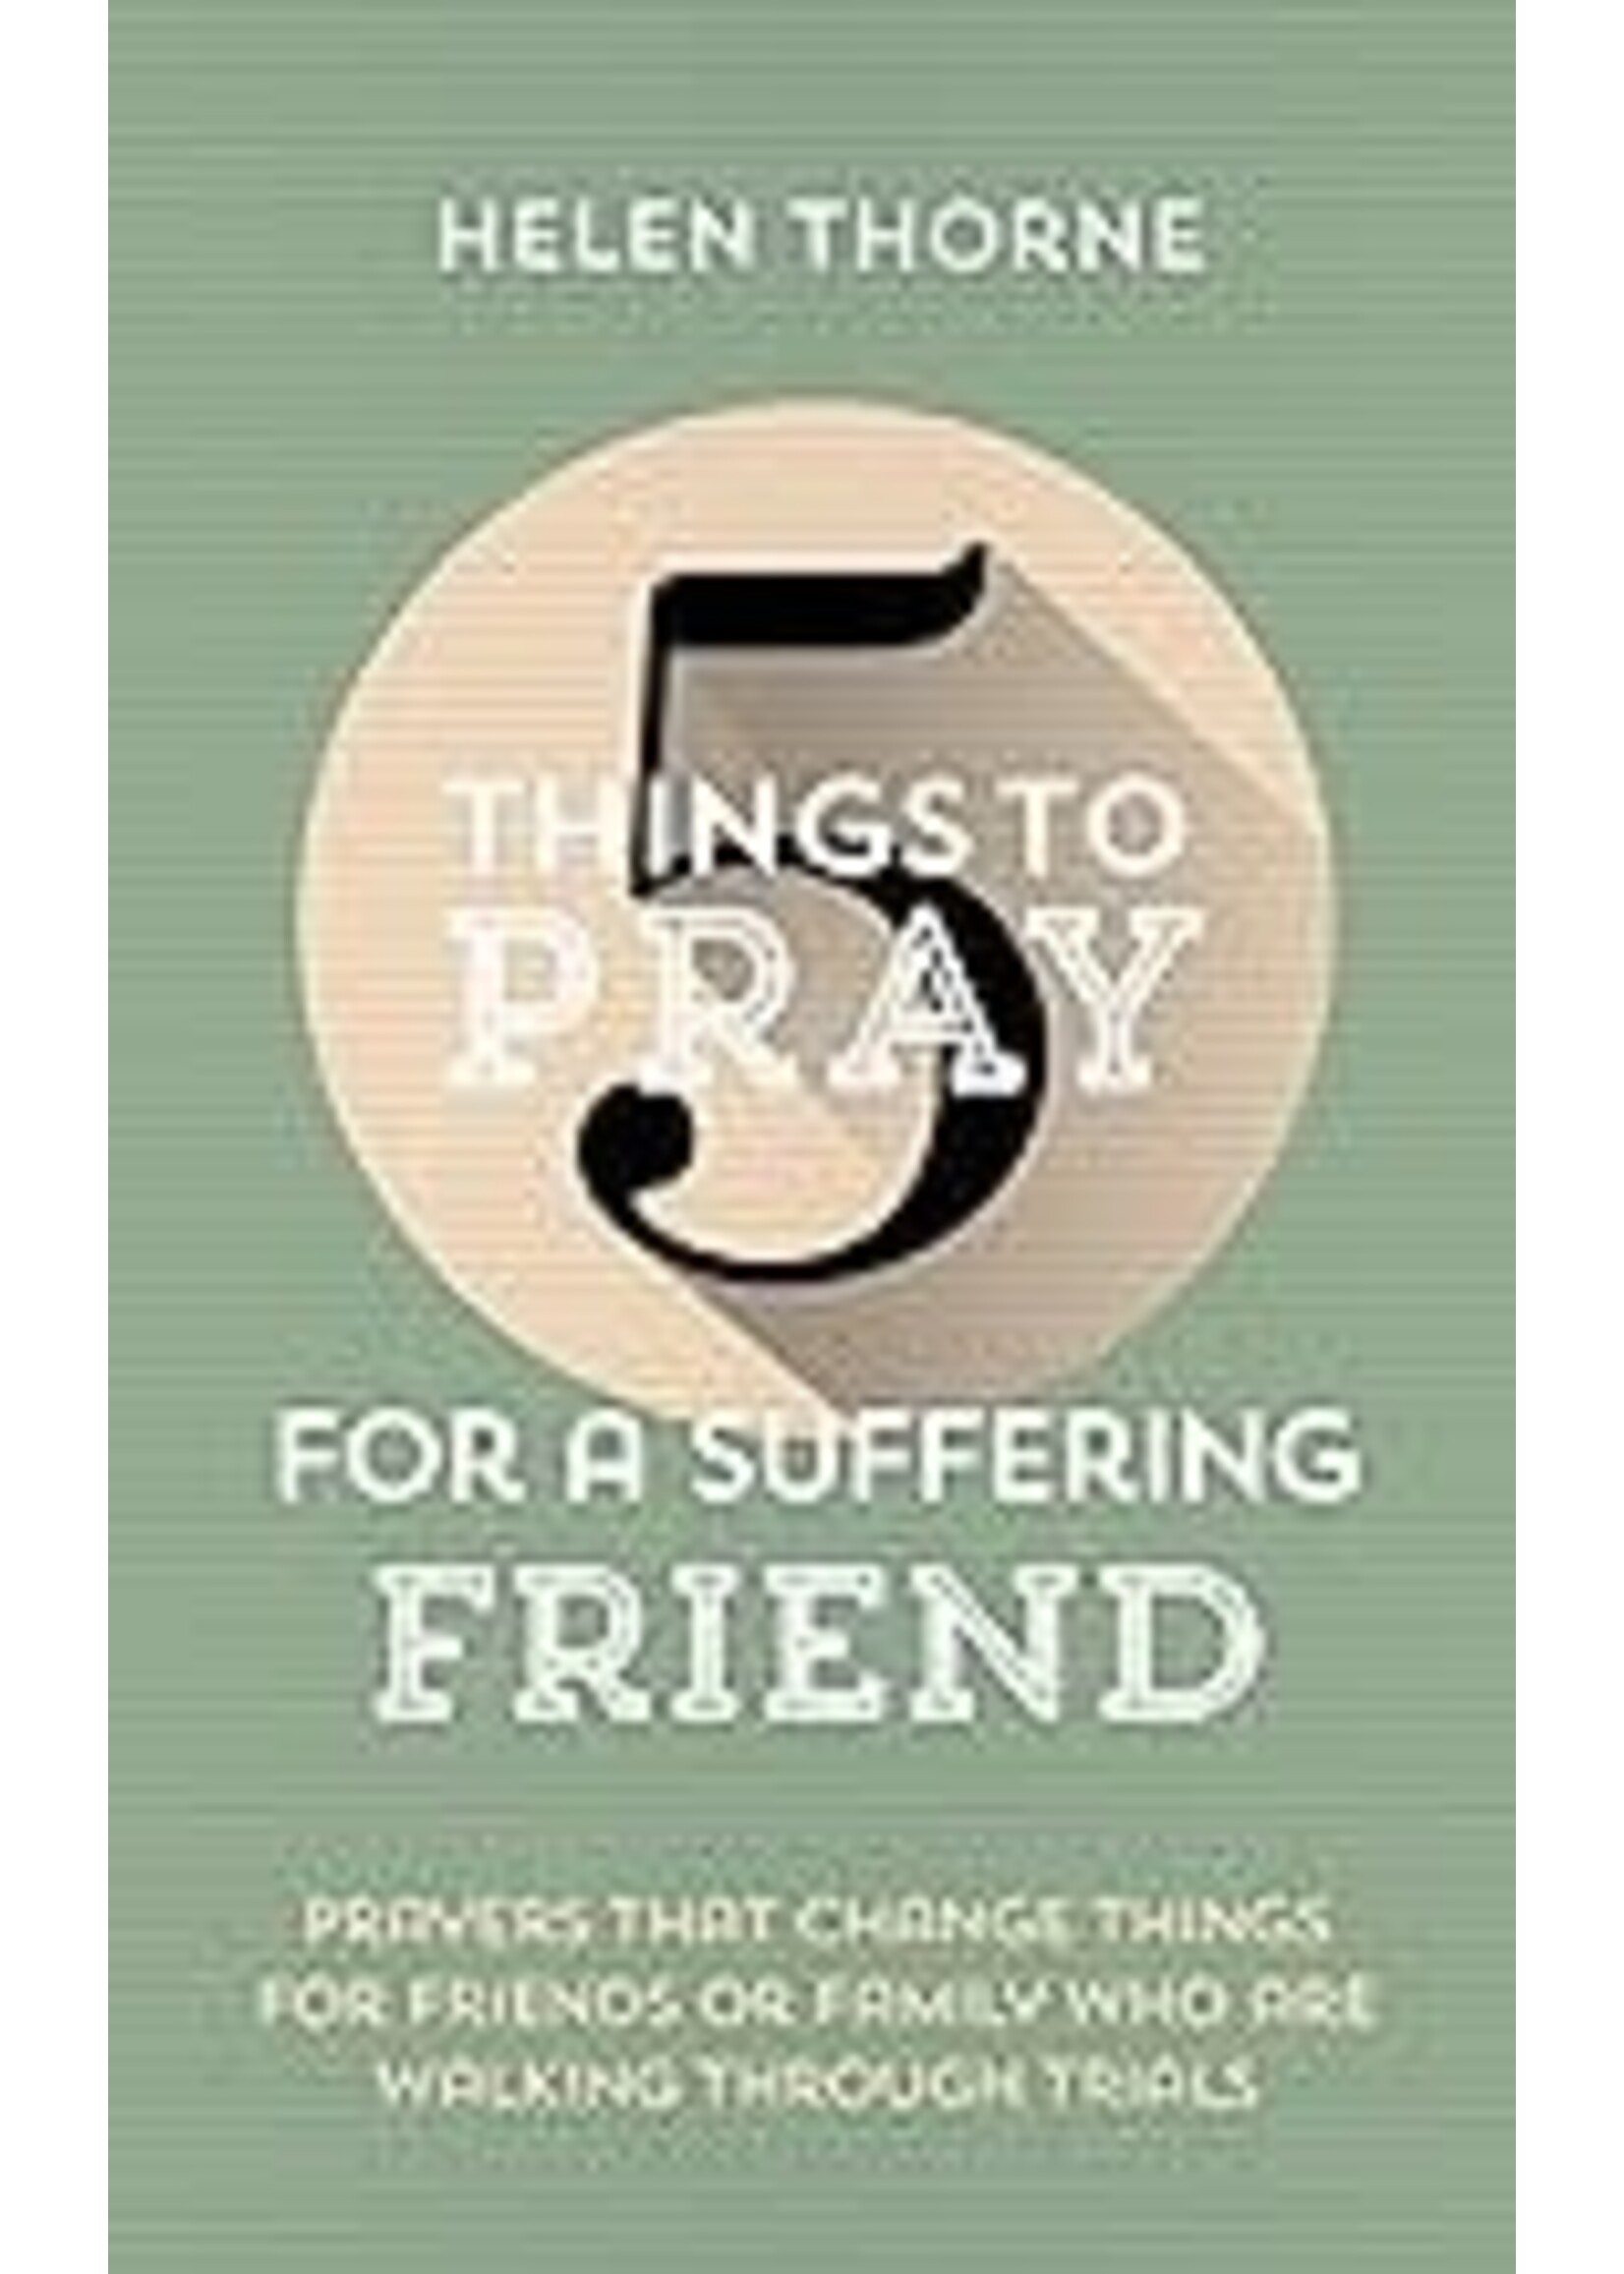 5 Things to Pray for a Suffering Friend